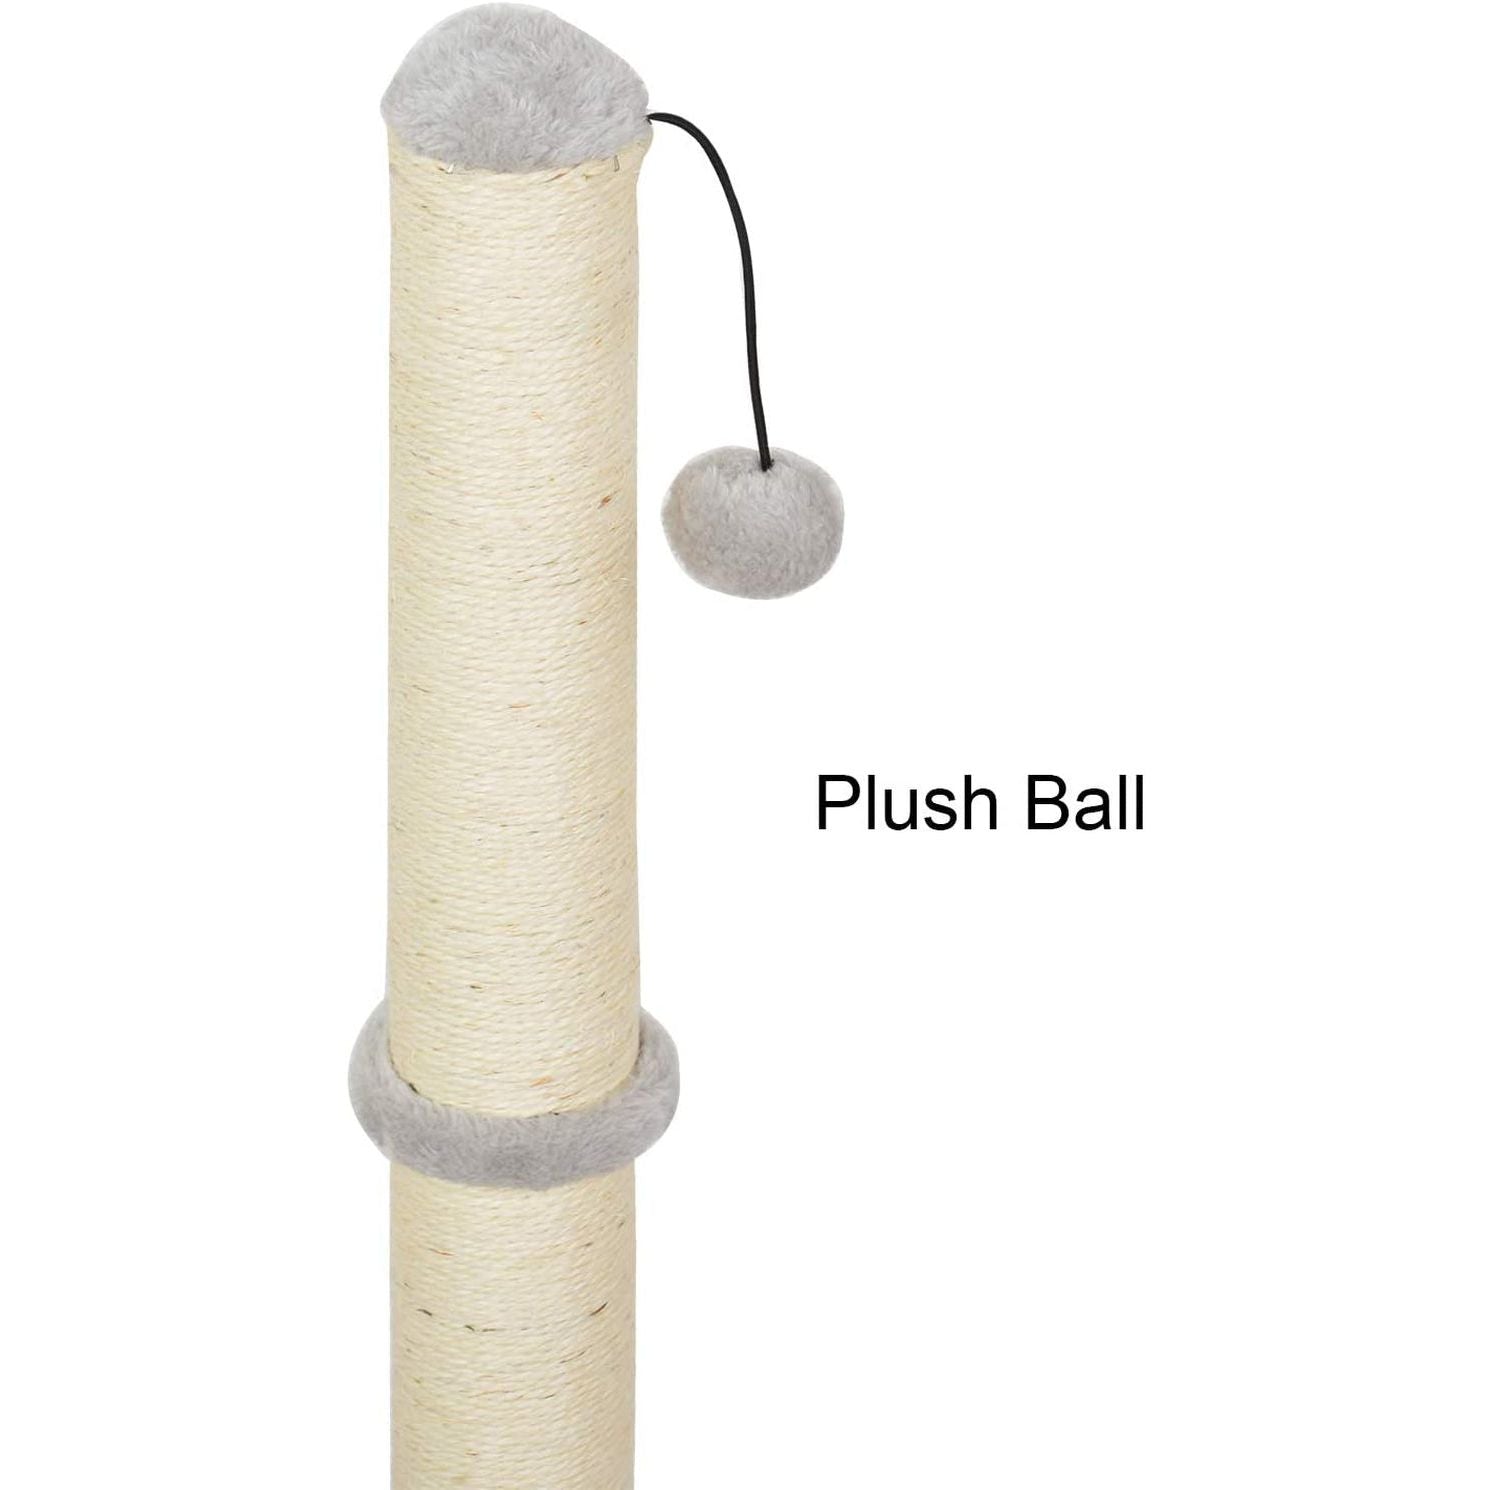 Cat Scratching Post, Indoor Cat Post with Sturdy Natural Sisal Rope